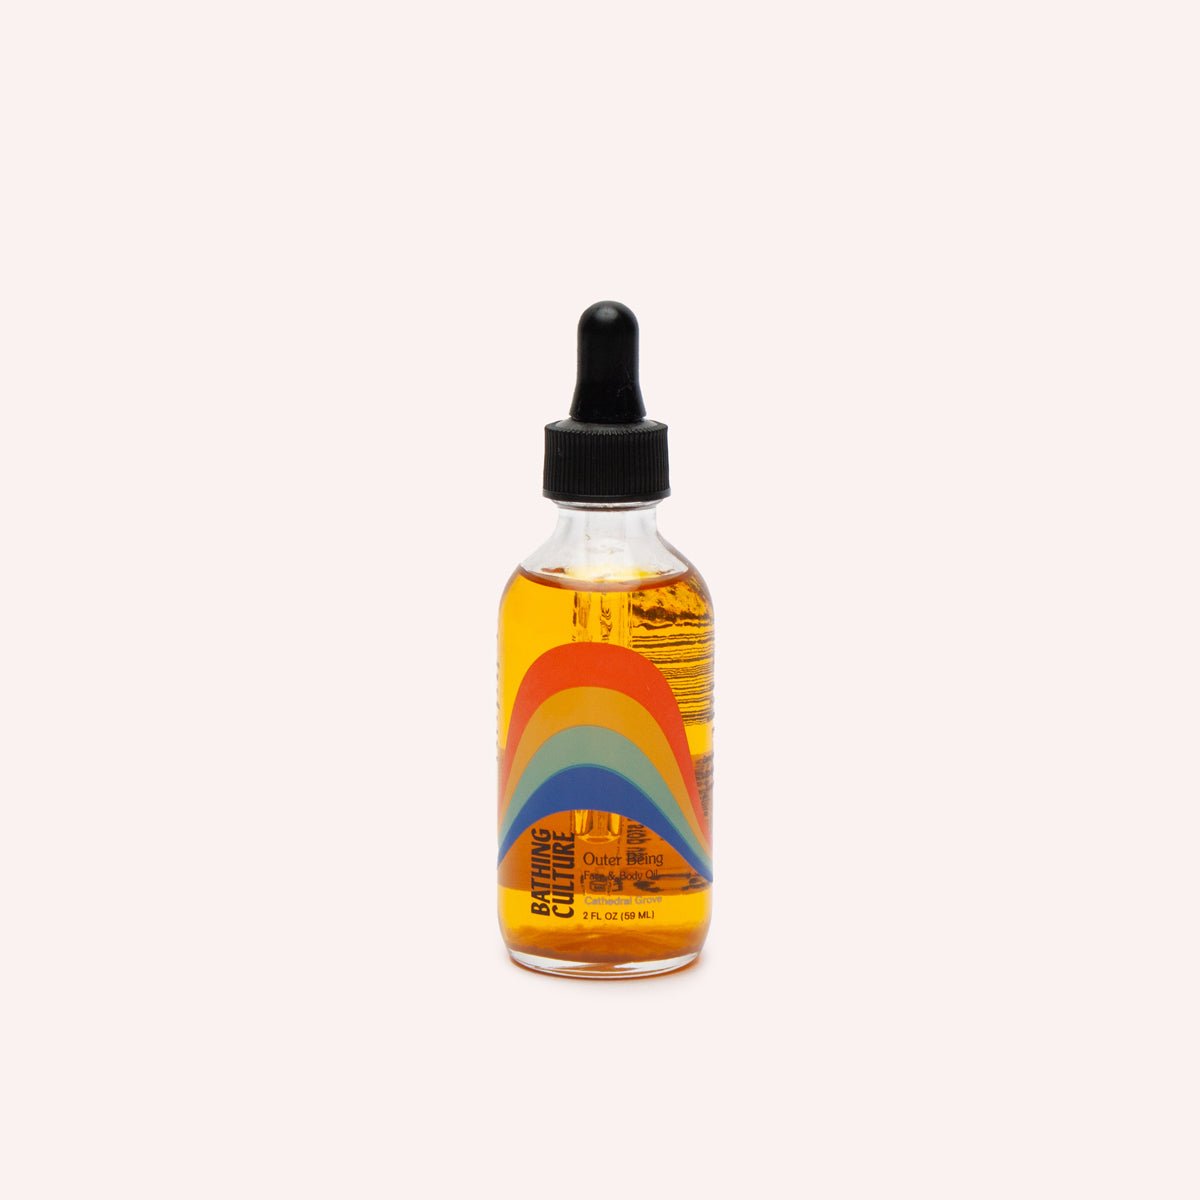 A clear glass bottle with a black dropper top holds a face and body oil. The Outer Being Face & Body oil is handcrafted by Bathing Culture in San Francisco, California.